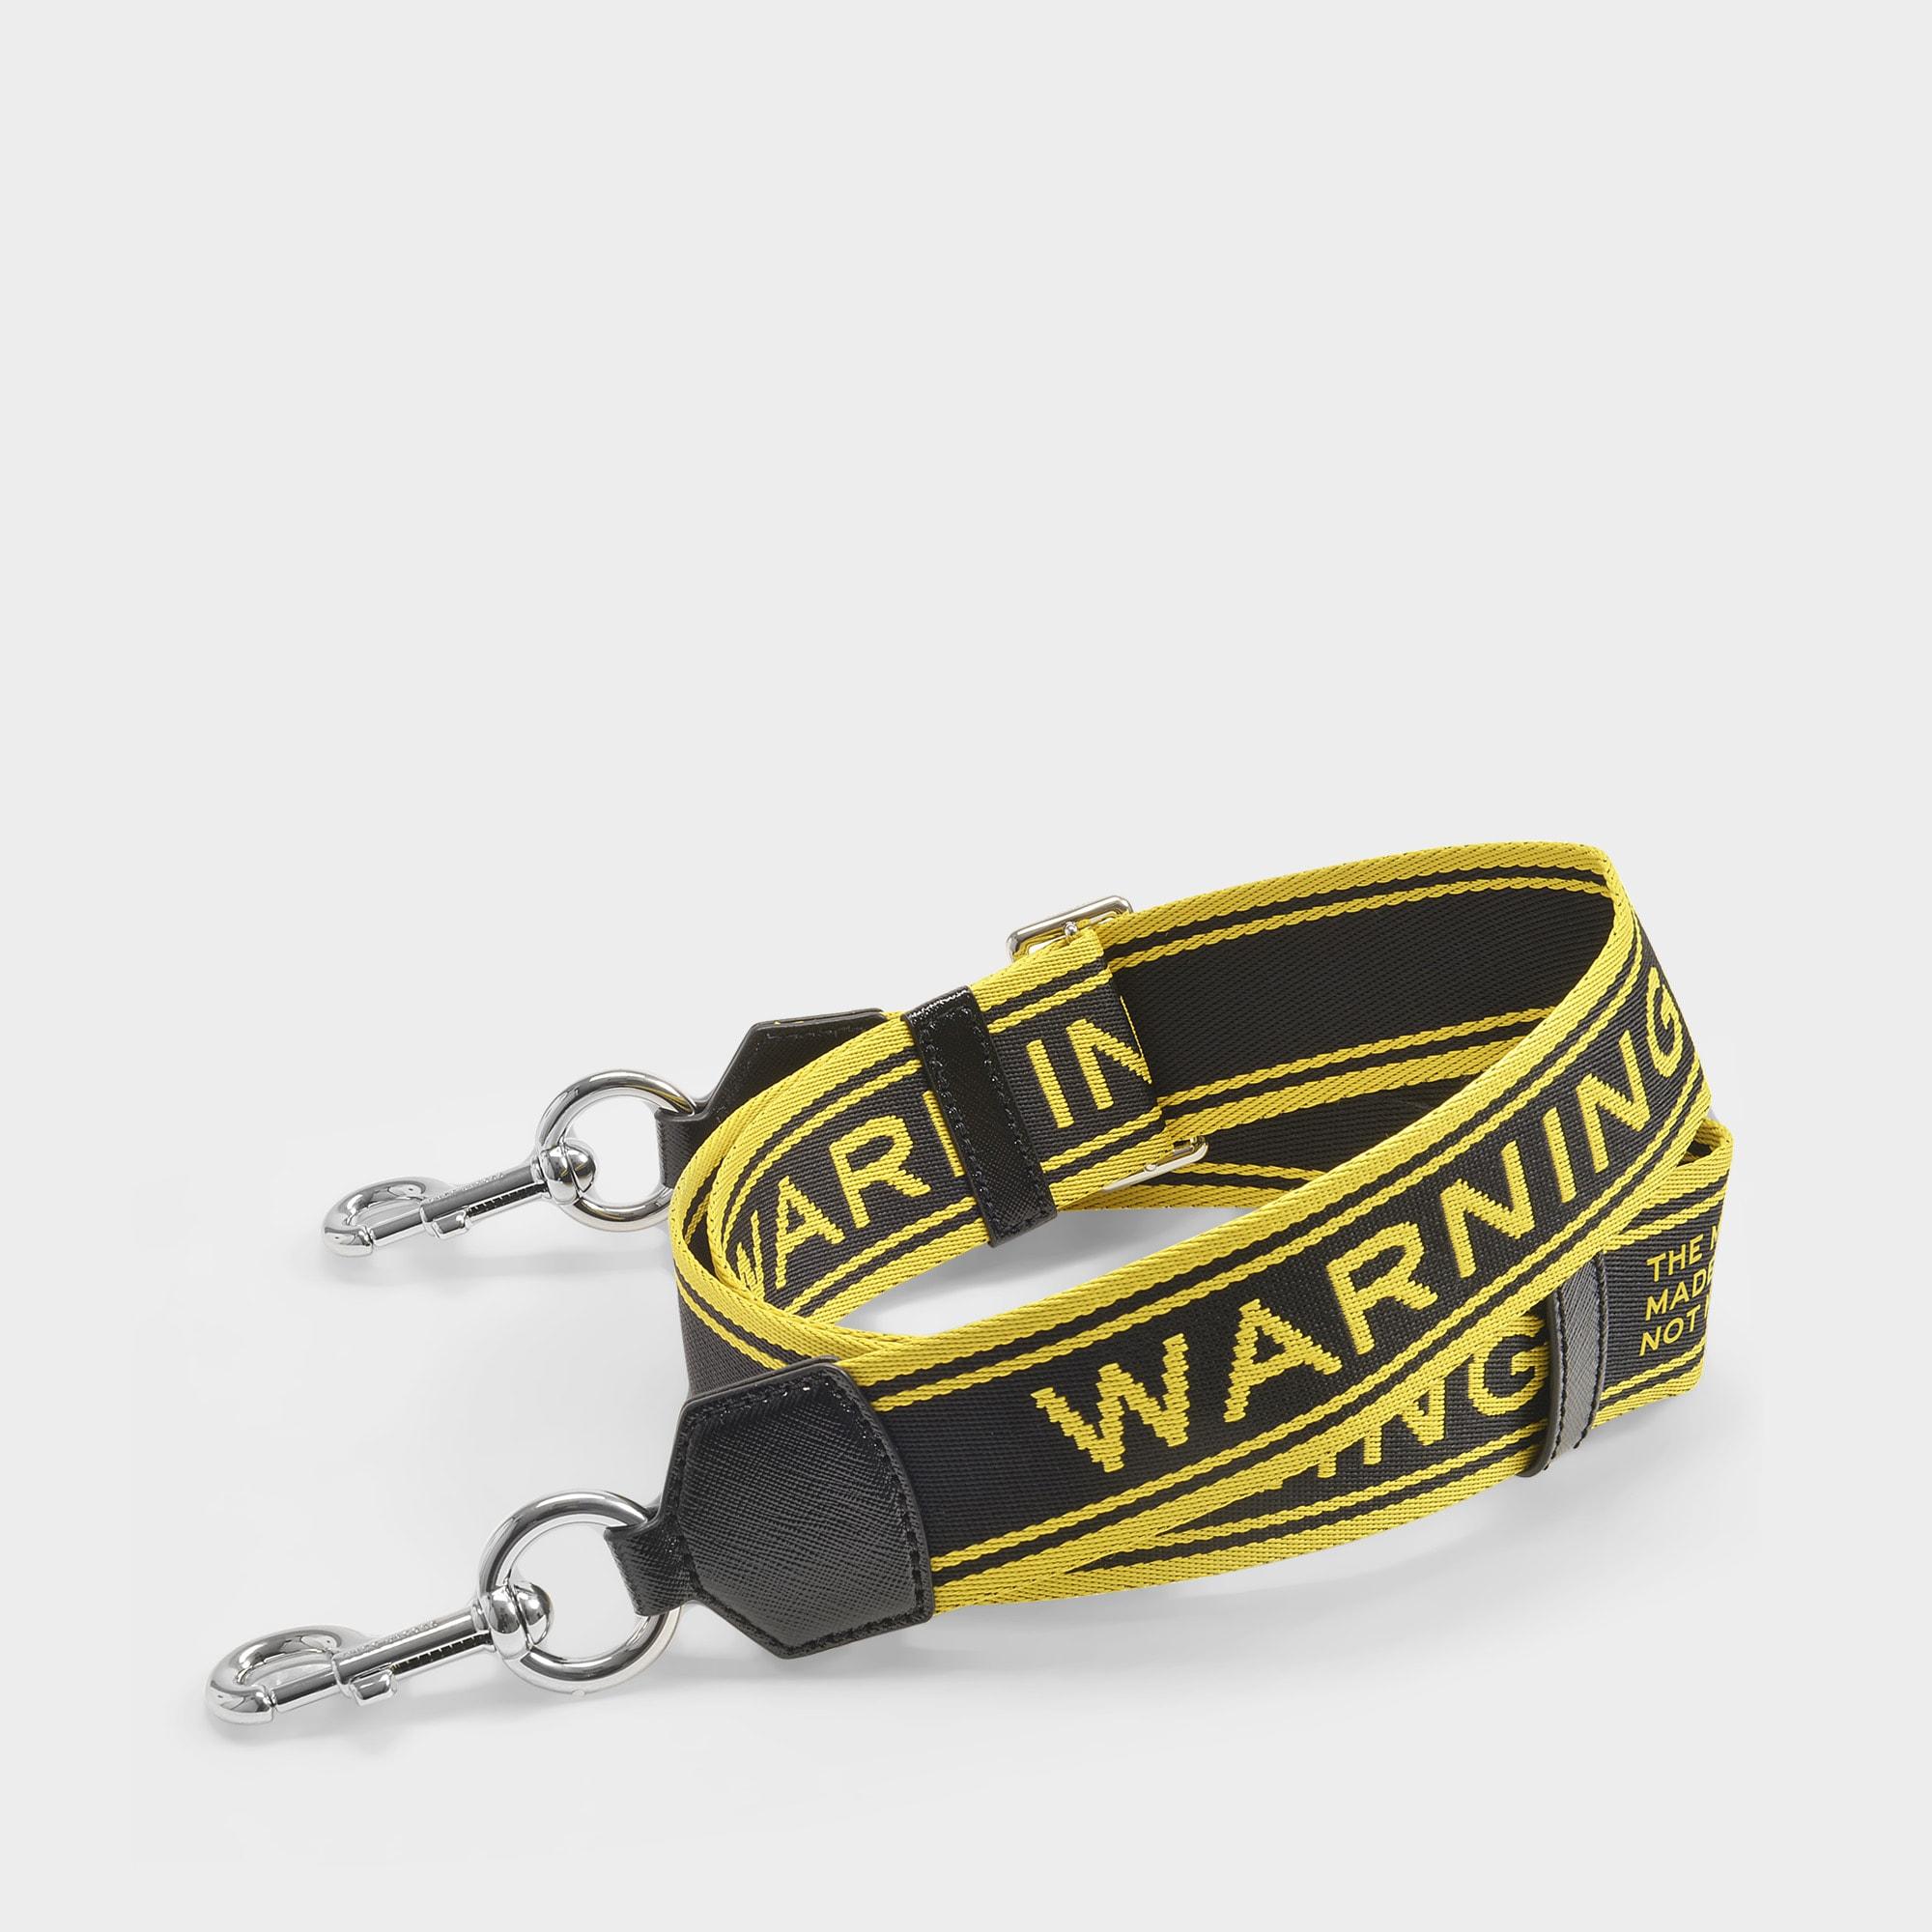 Marc Jacobs, Bags, Iso Marc Jacobs Warning Strap